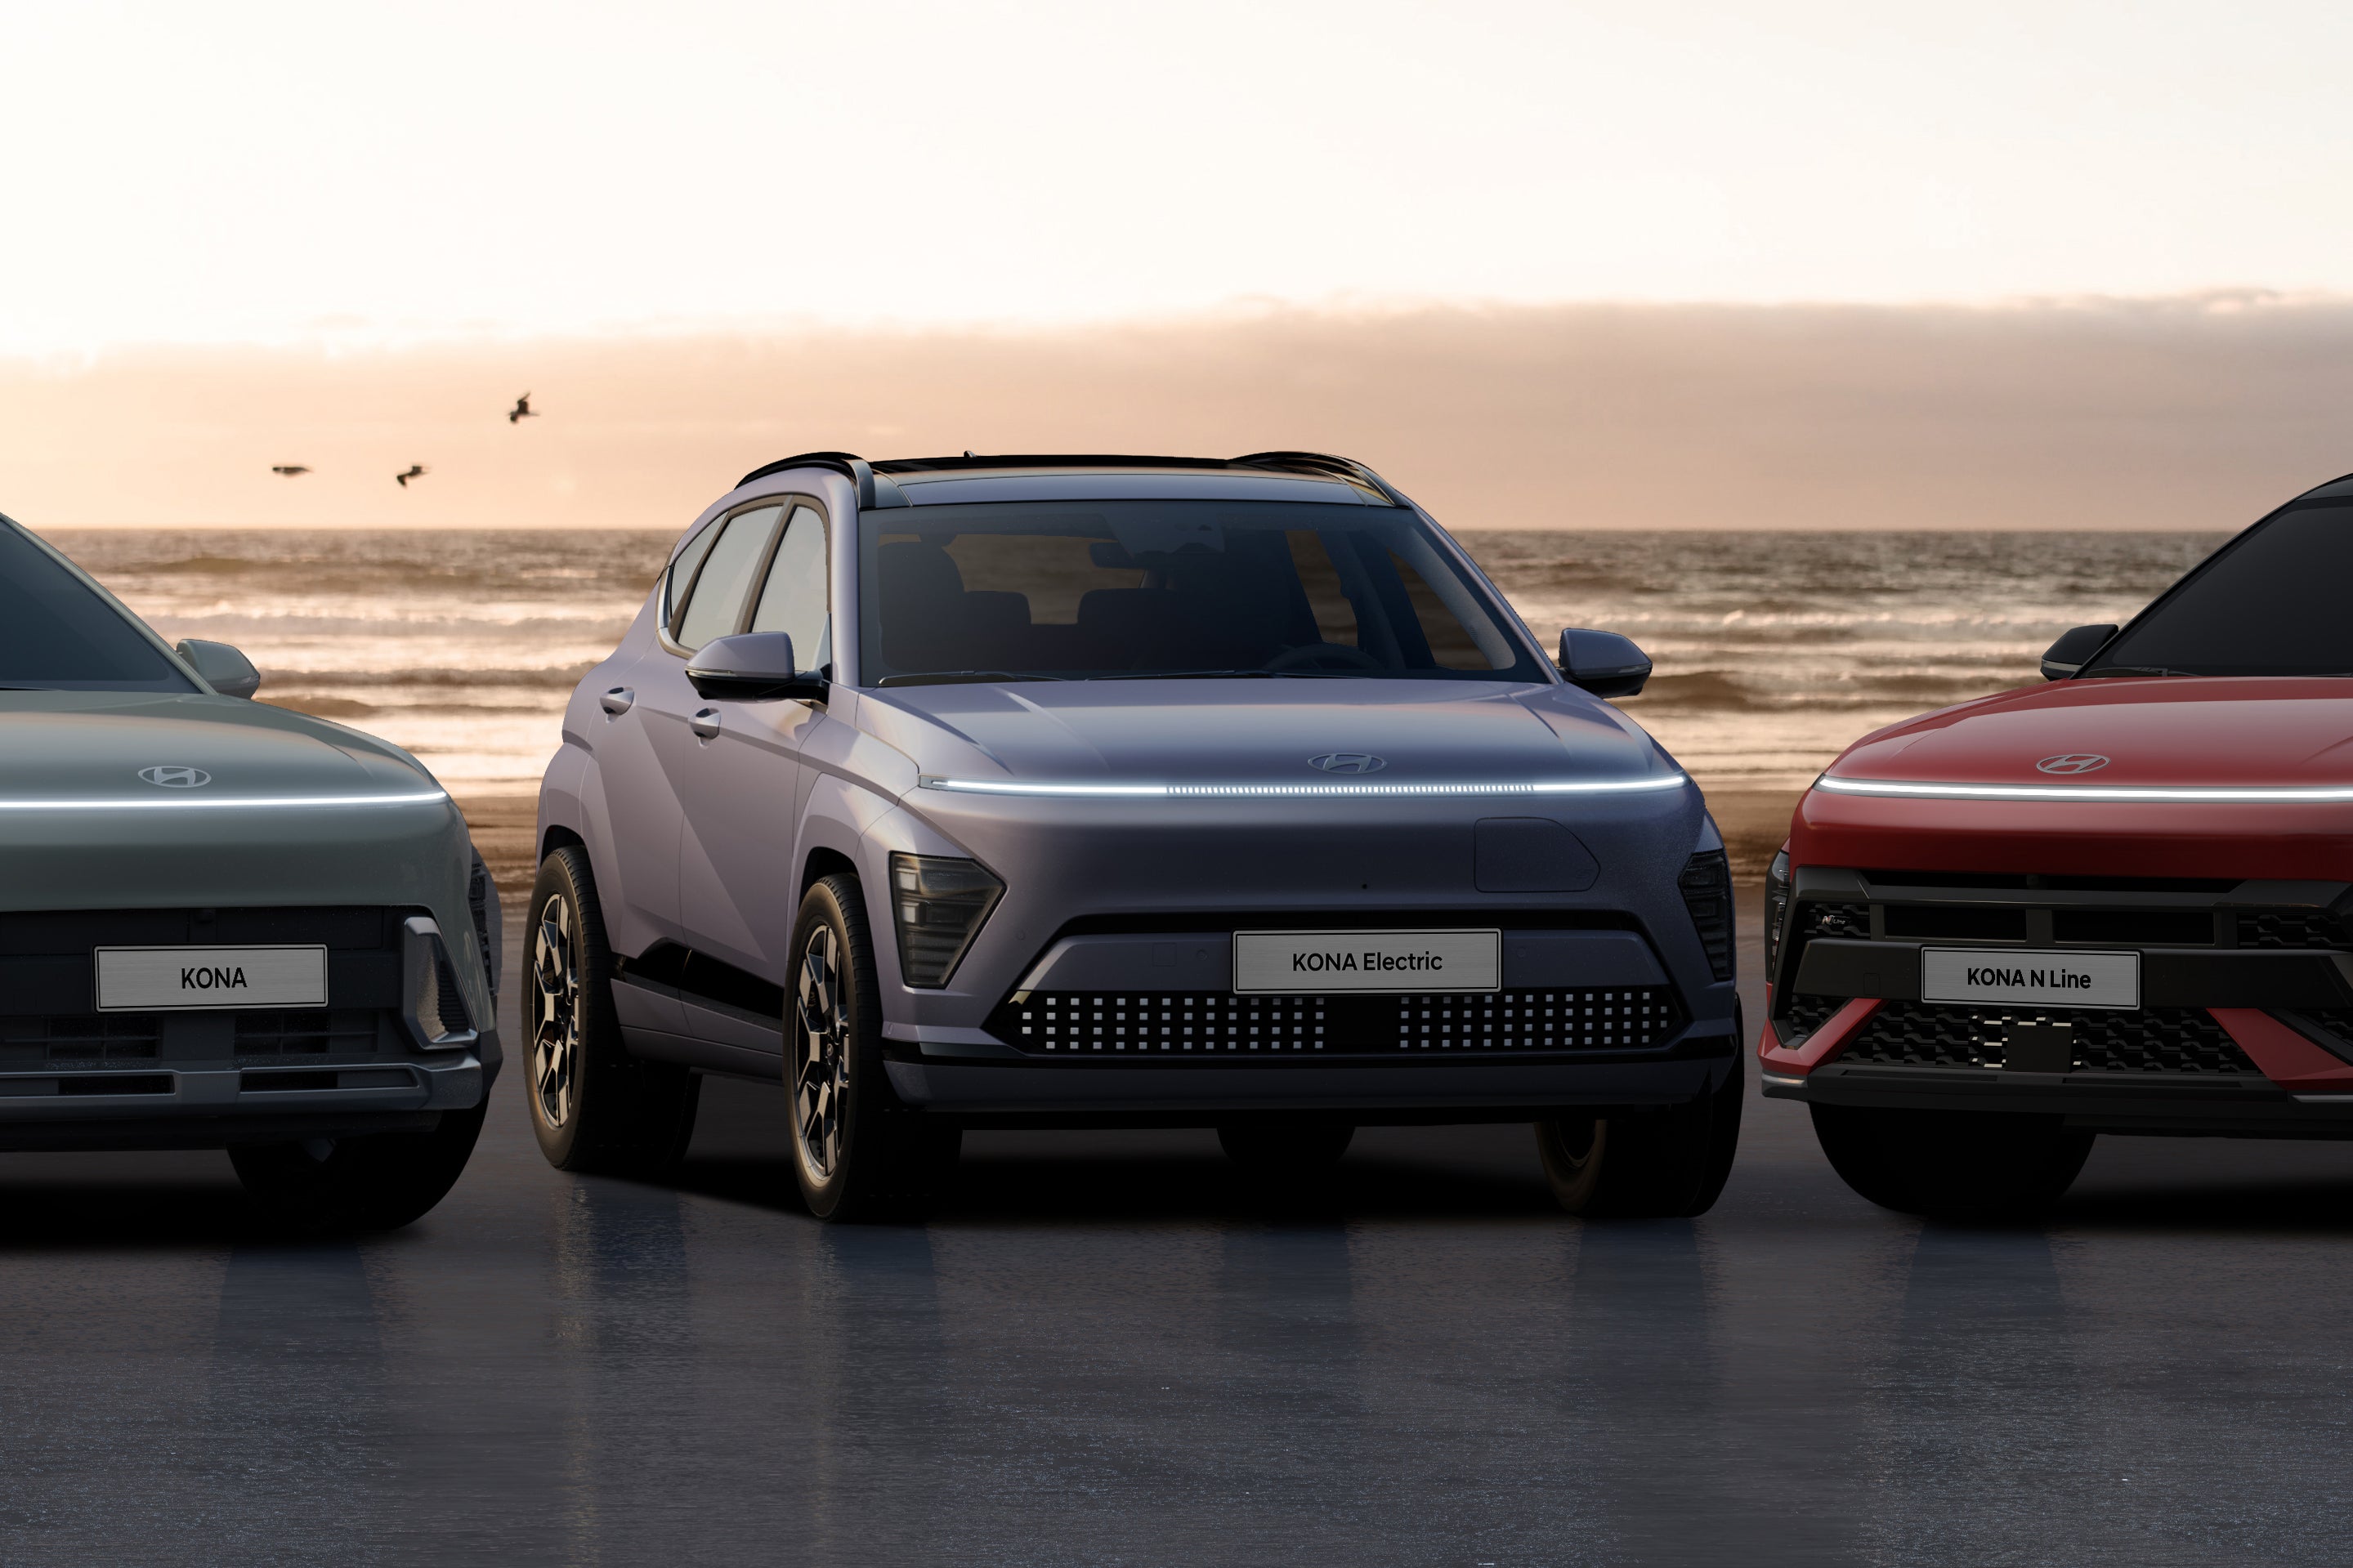 New 2023 Hyundai Kona prices, specs and release date heycar